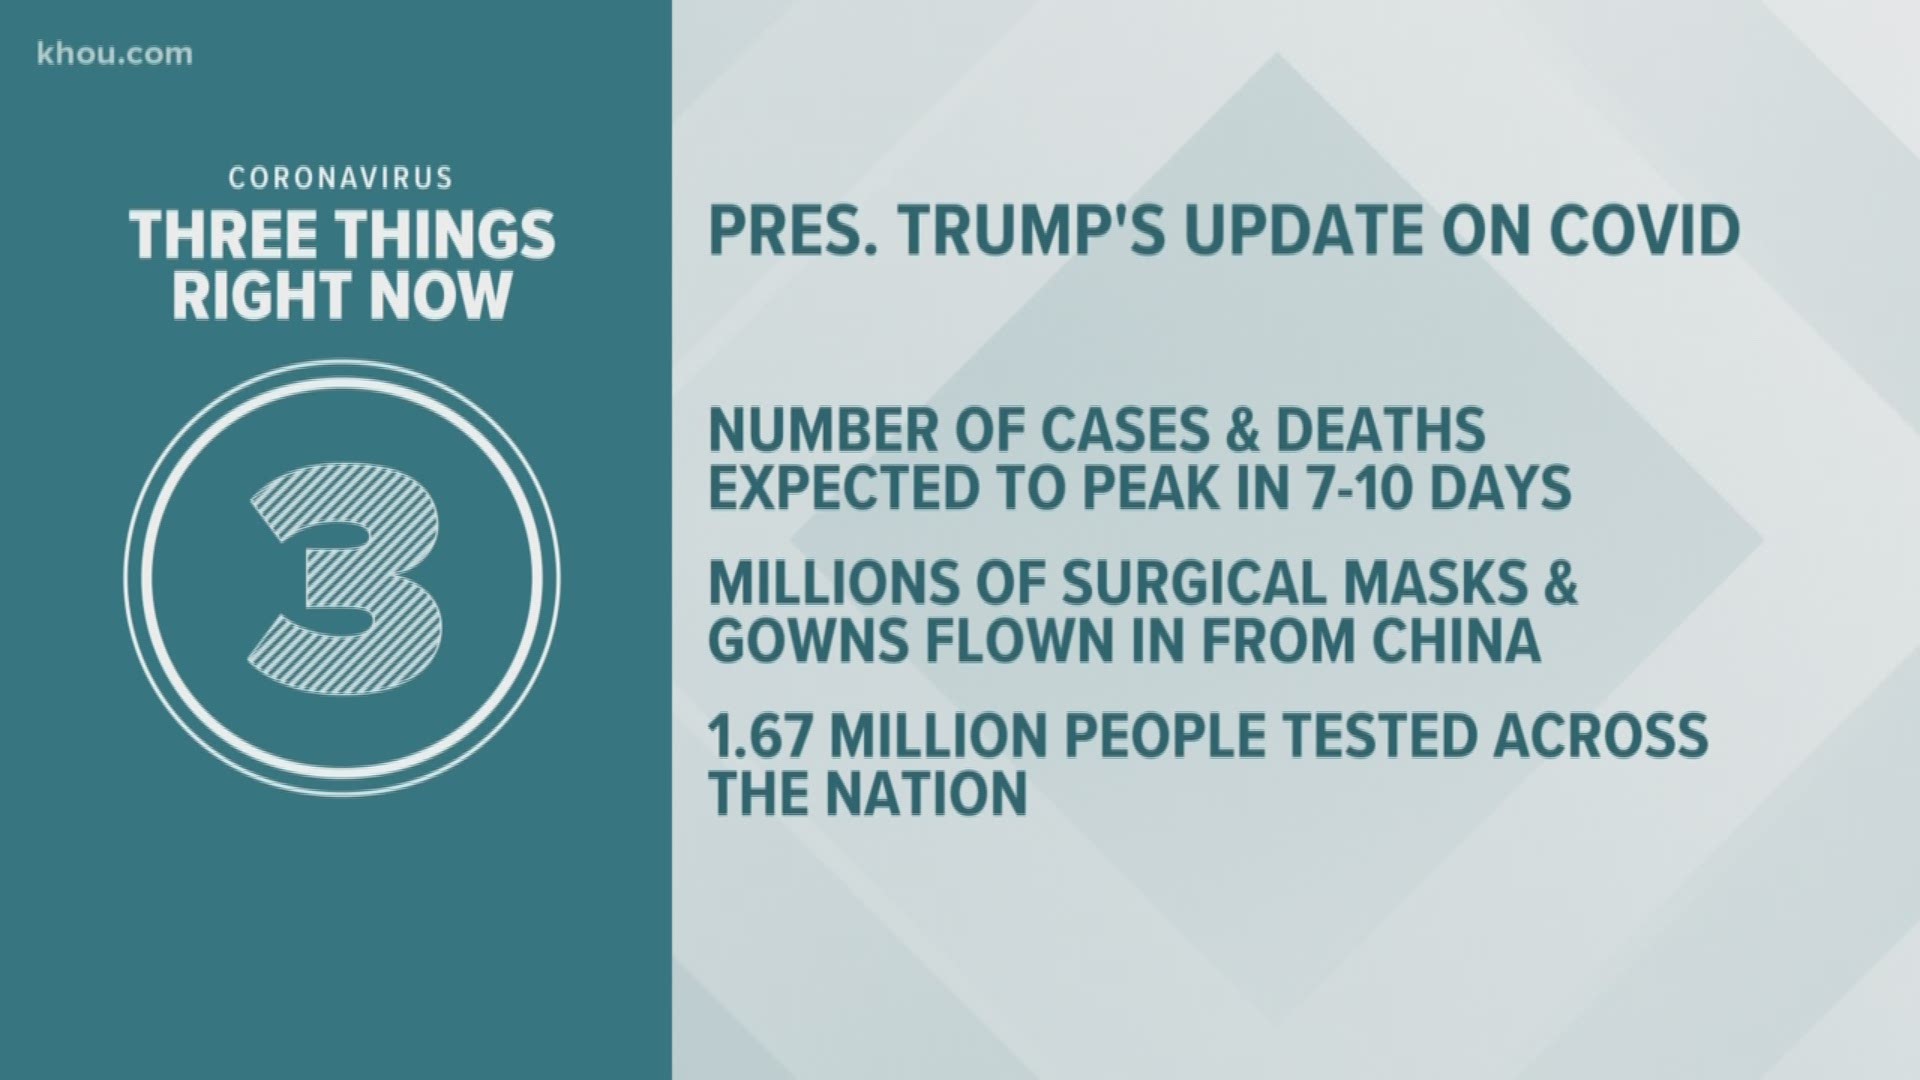 President Trump said Americans should brace for one of the toughest weeks ahead in the coronavirus pandemic, plus more top headlines.